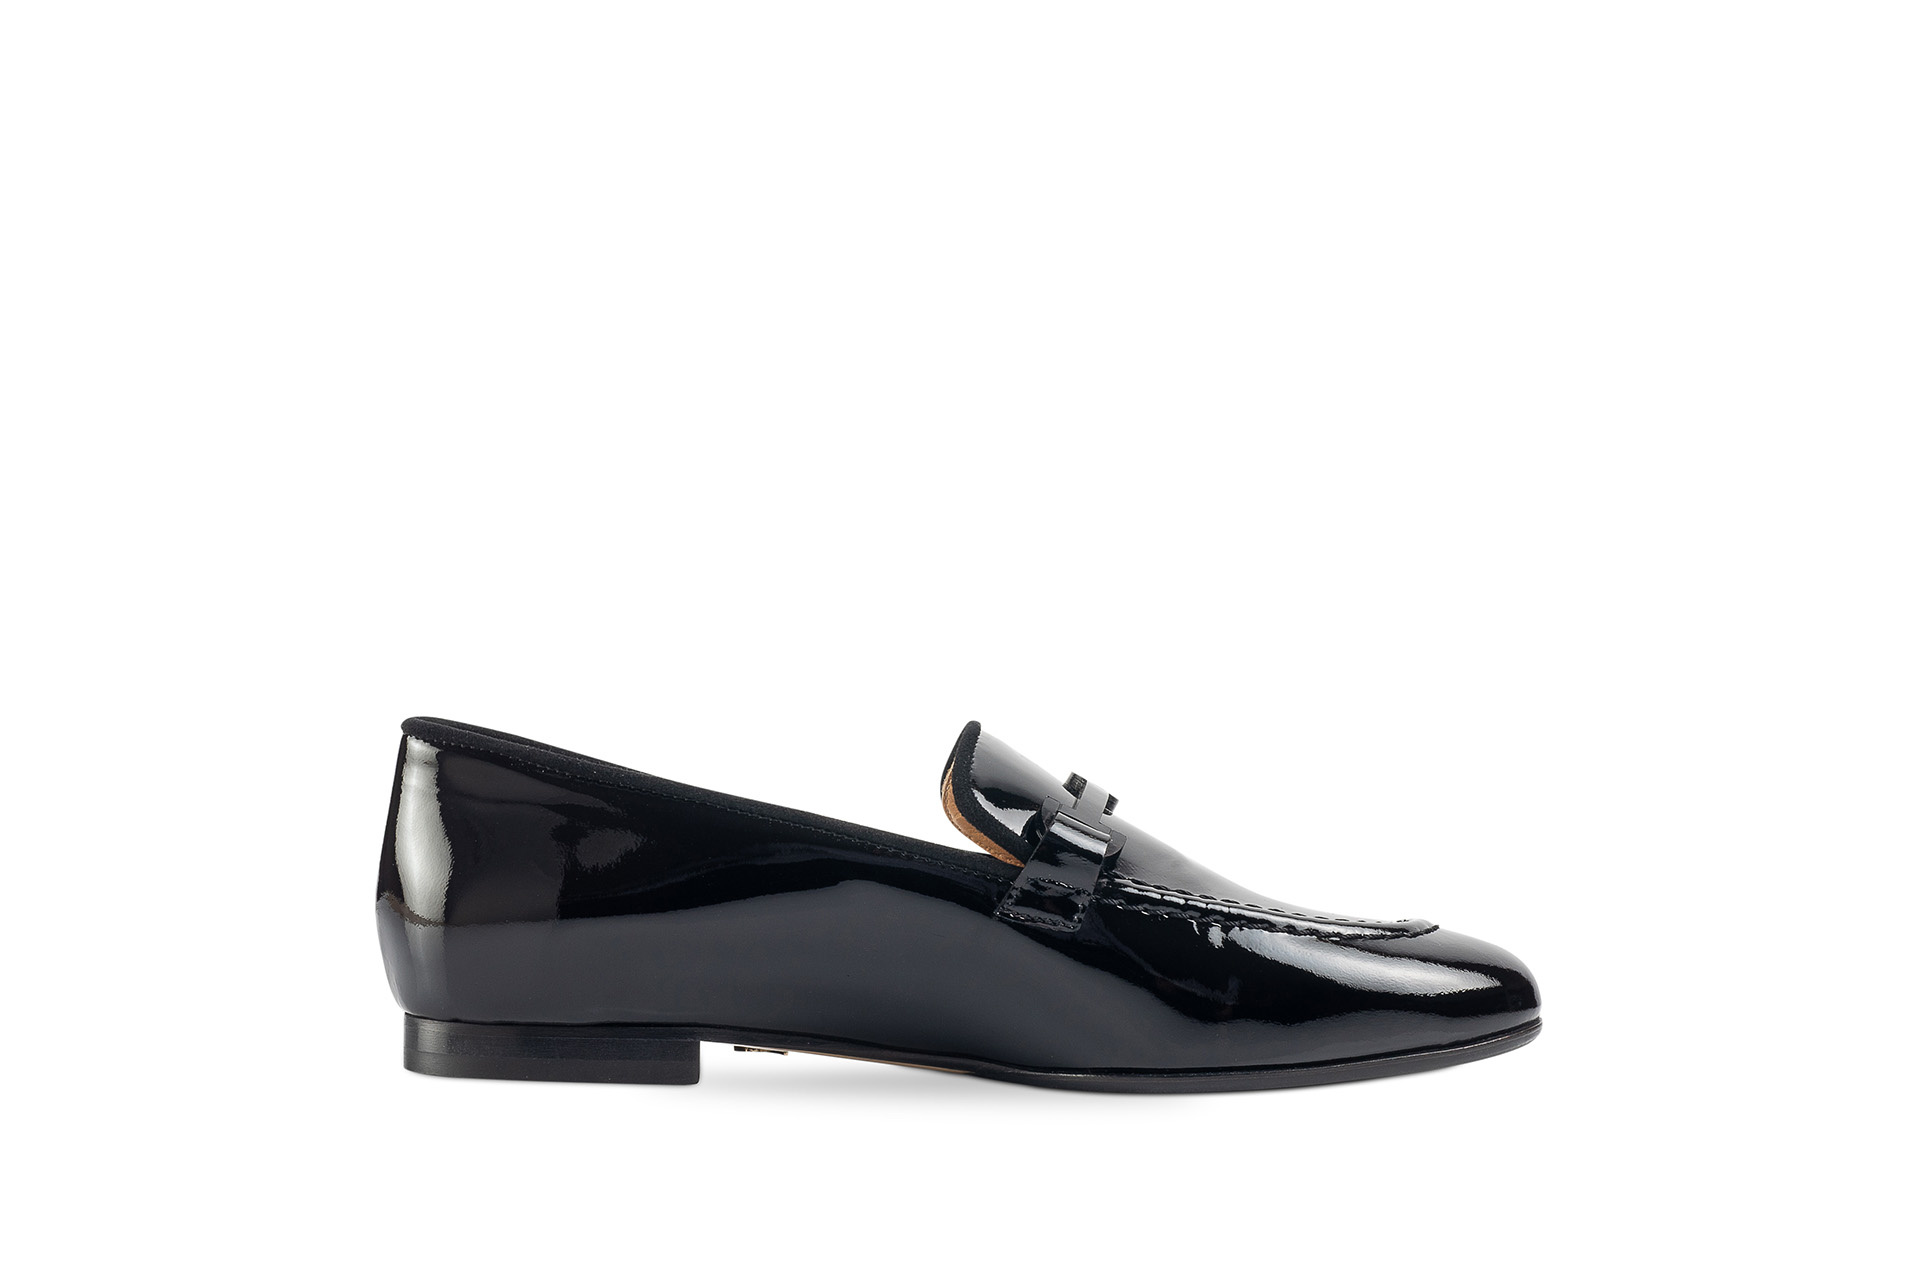 The Carini patent leather shoes are the best working shoes for women ...